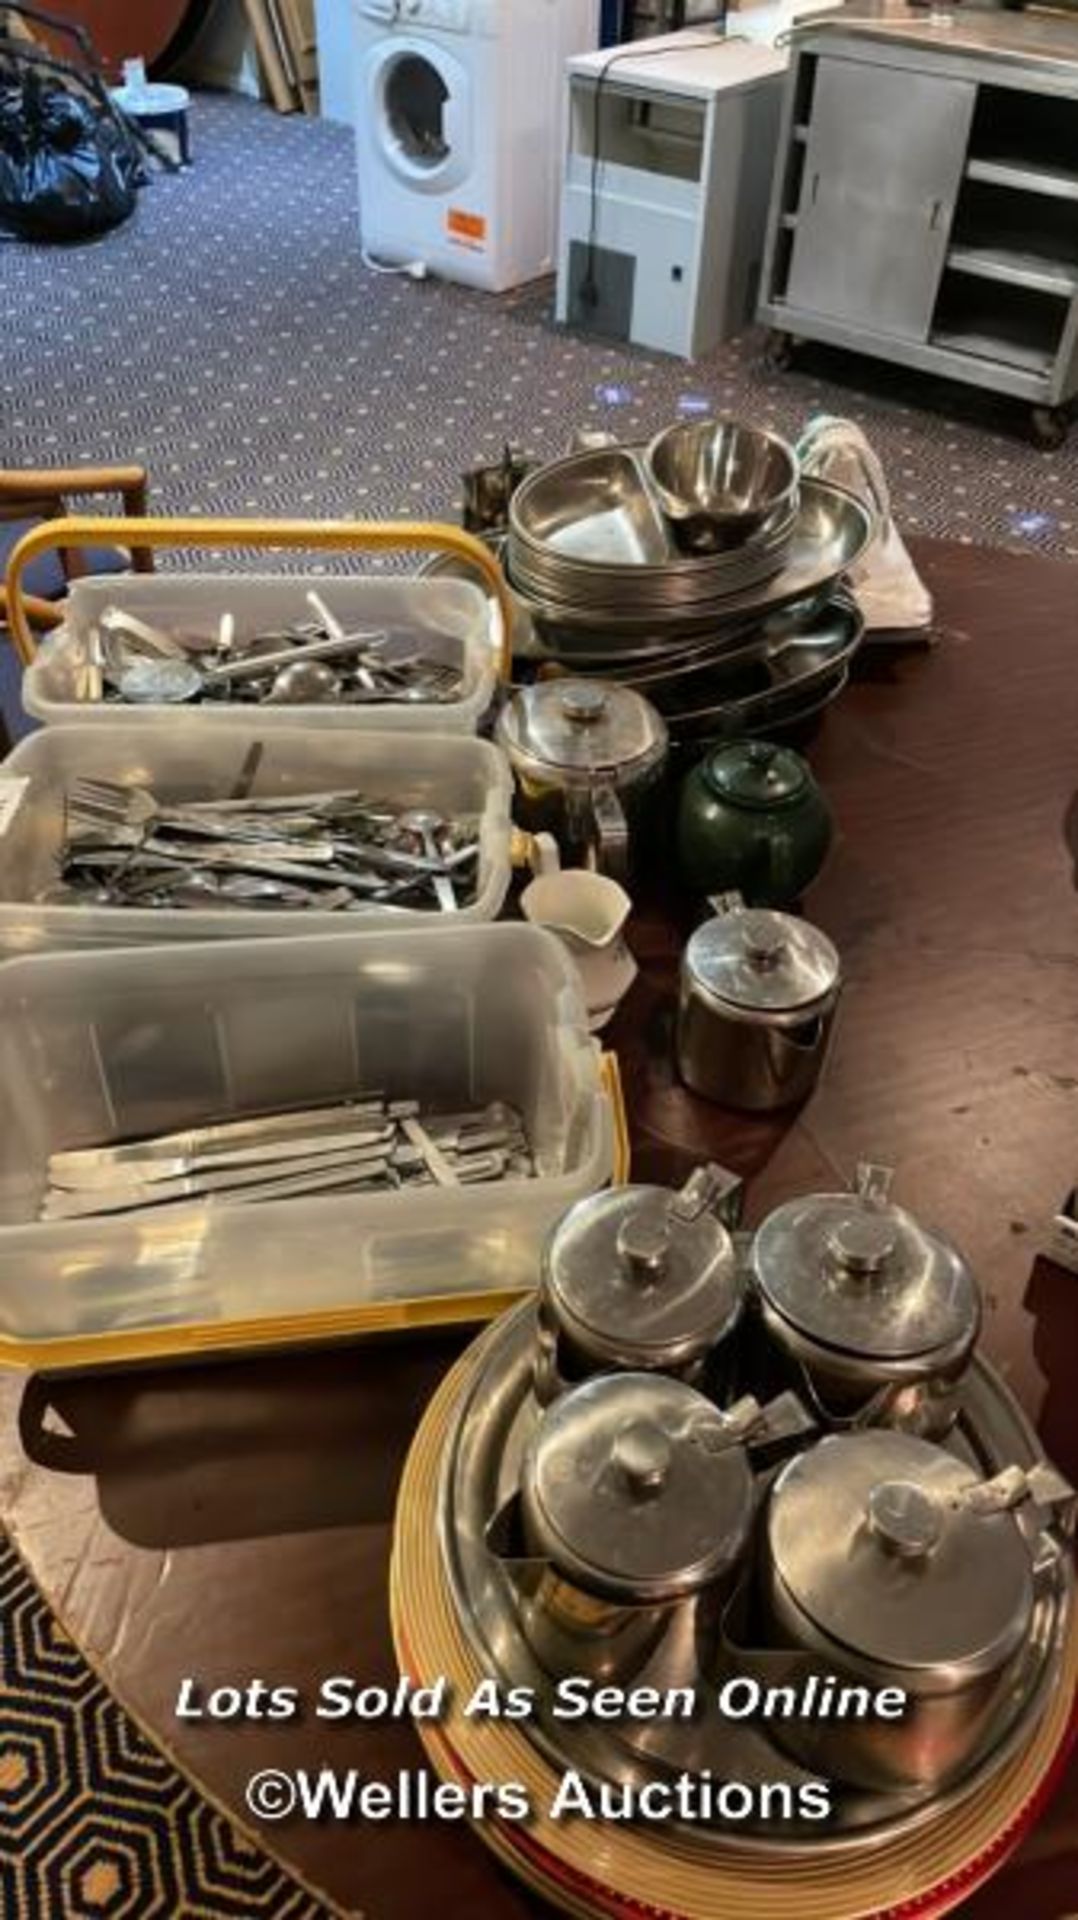 LARGE QUANTITY OF STAINLESS STEEL TEA POTS, GRAVY BOATS, CUTLERY, TRAYS AND AN IRON / COLLECTION